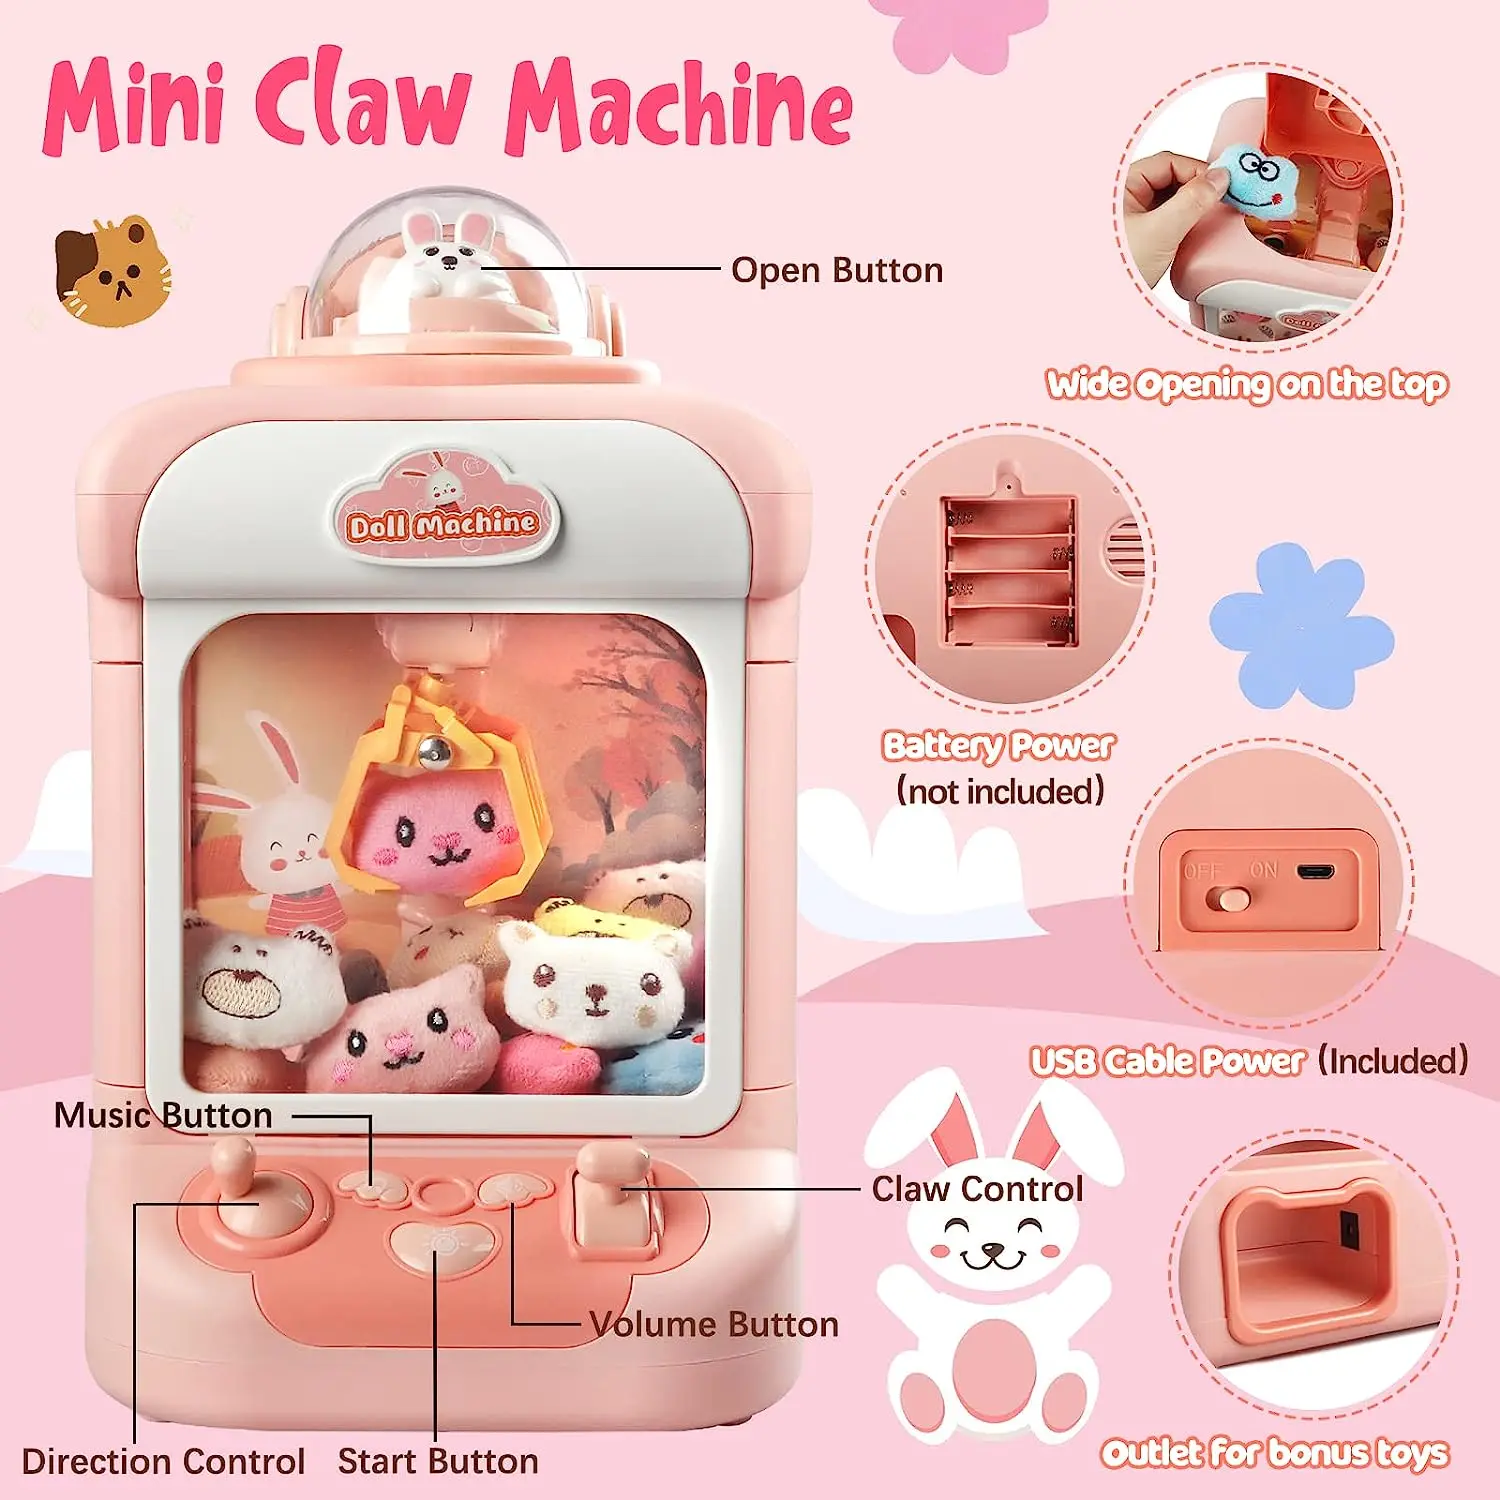 EPT Hot Sale Mini Super Crane Claw Machine Game Kit Toy with Plush Toys for Kids